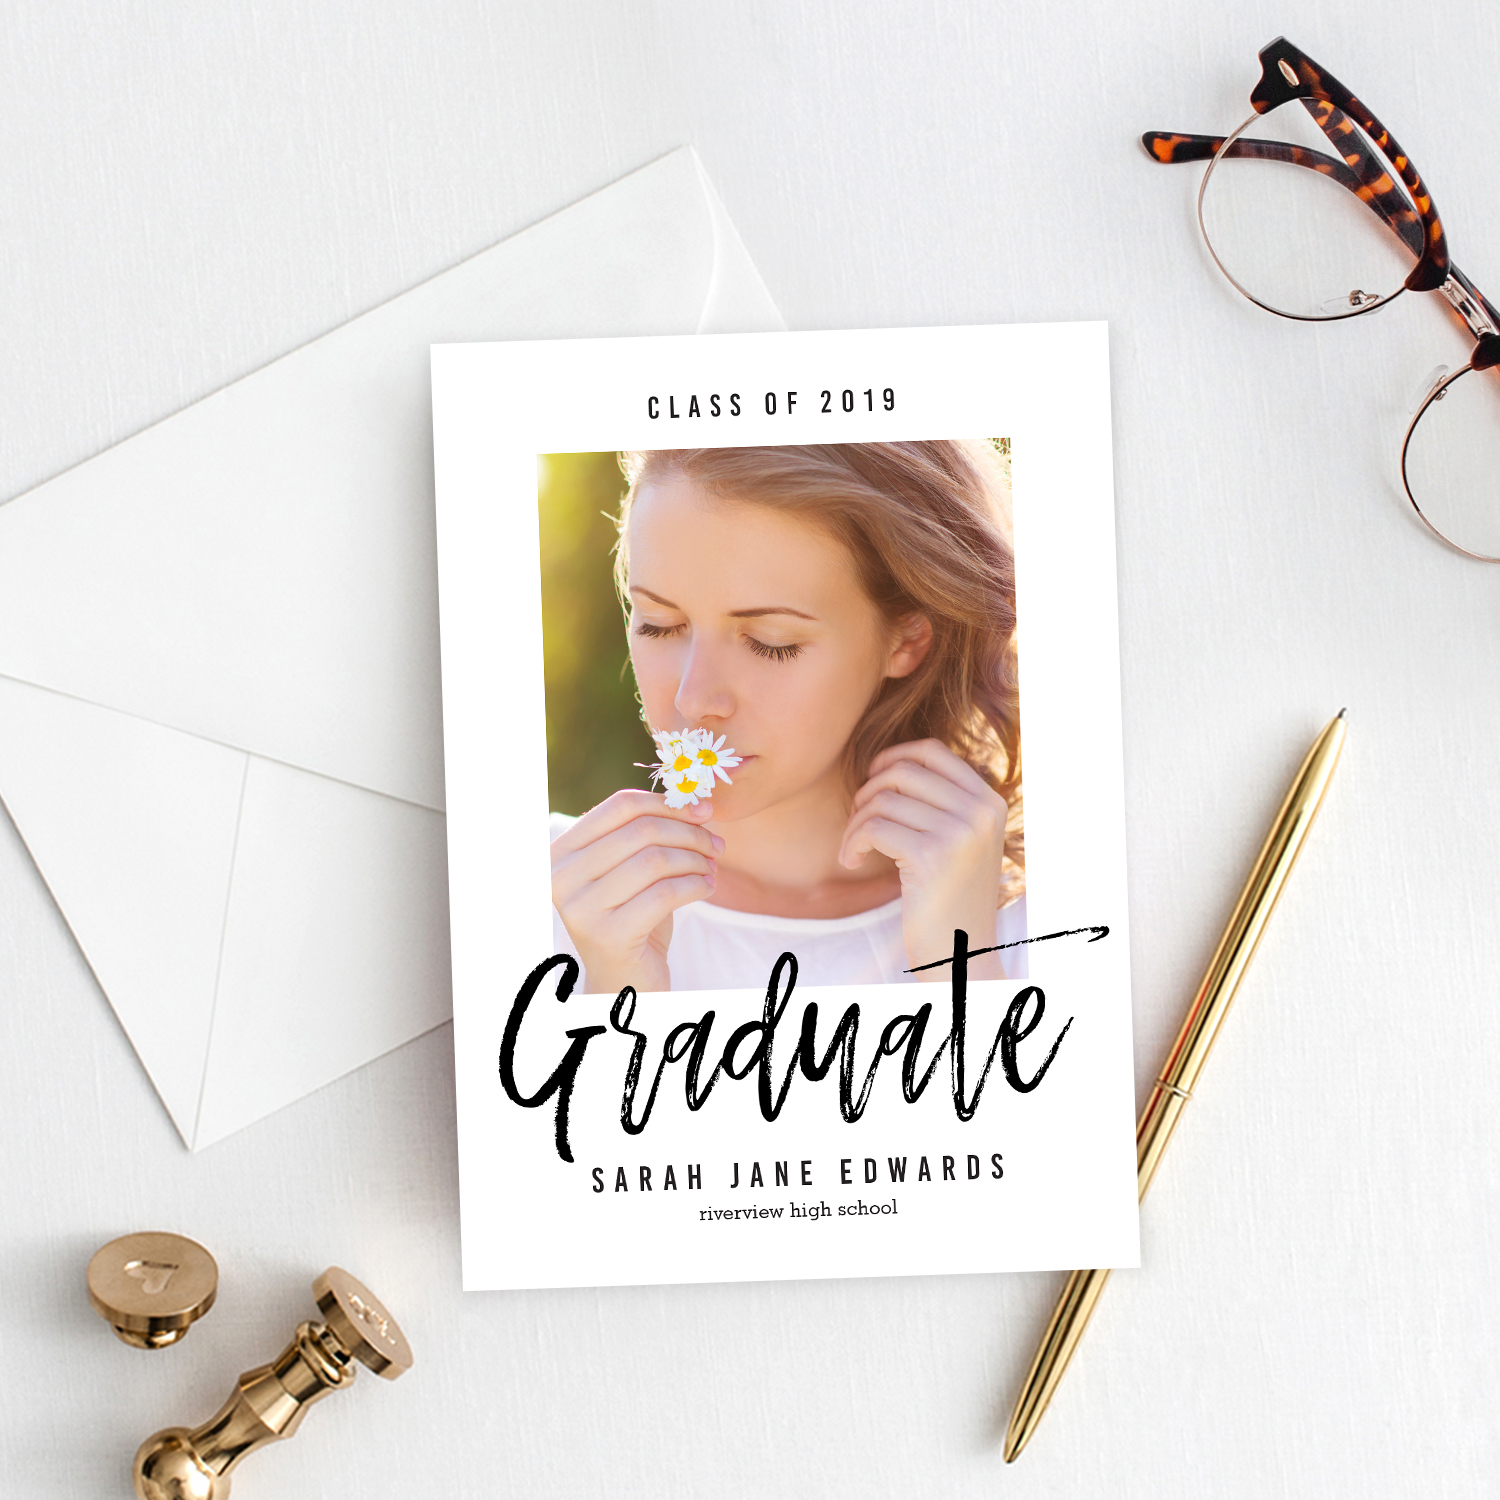 proudly-brushed-graduation-invitation-template-editable-color-berry-berry-sweet